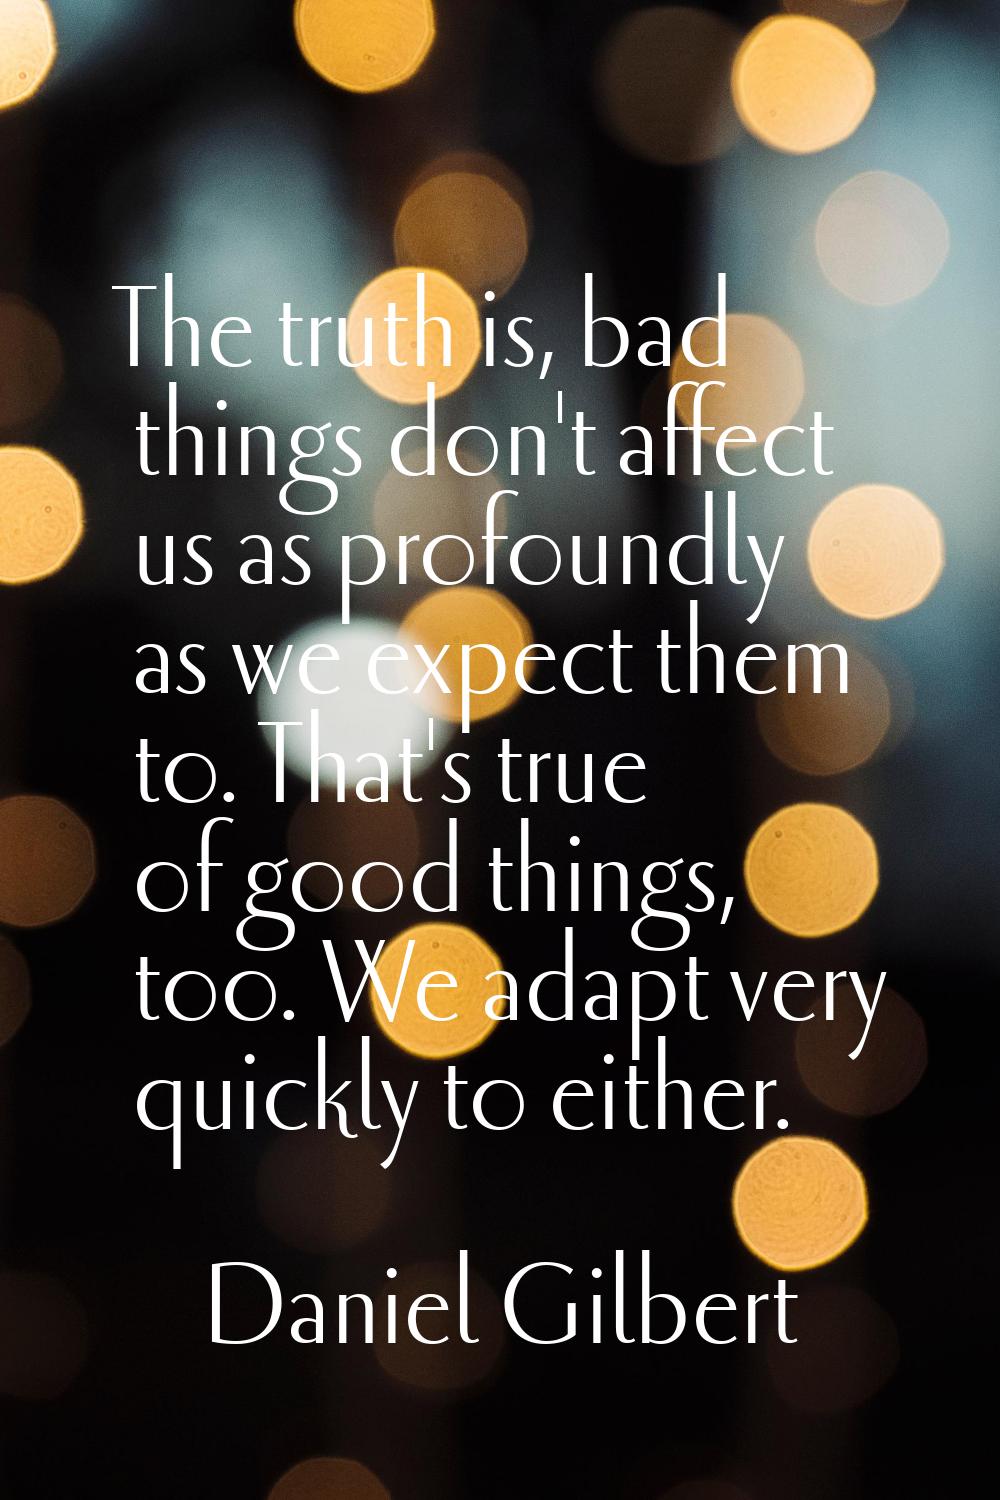 The truth is, bad things don't affect us as profoundly as we expect them to. That's true of good th